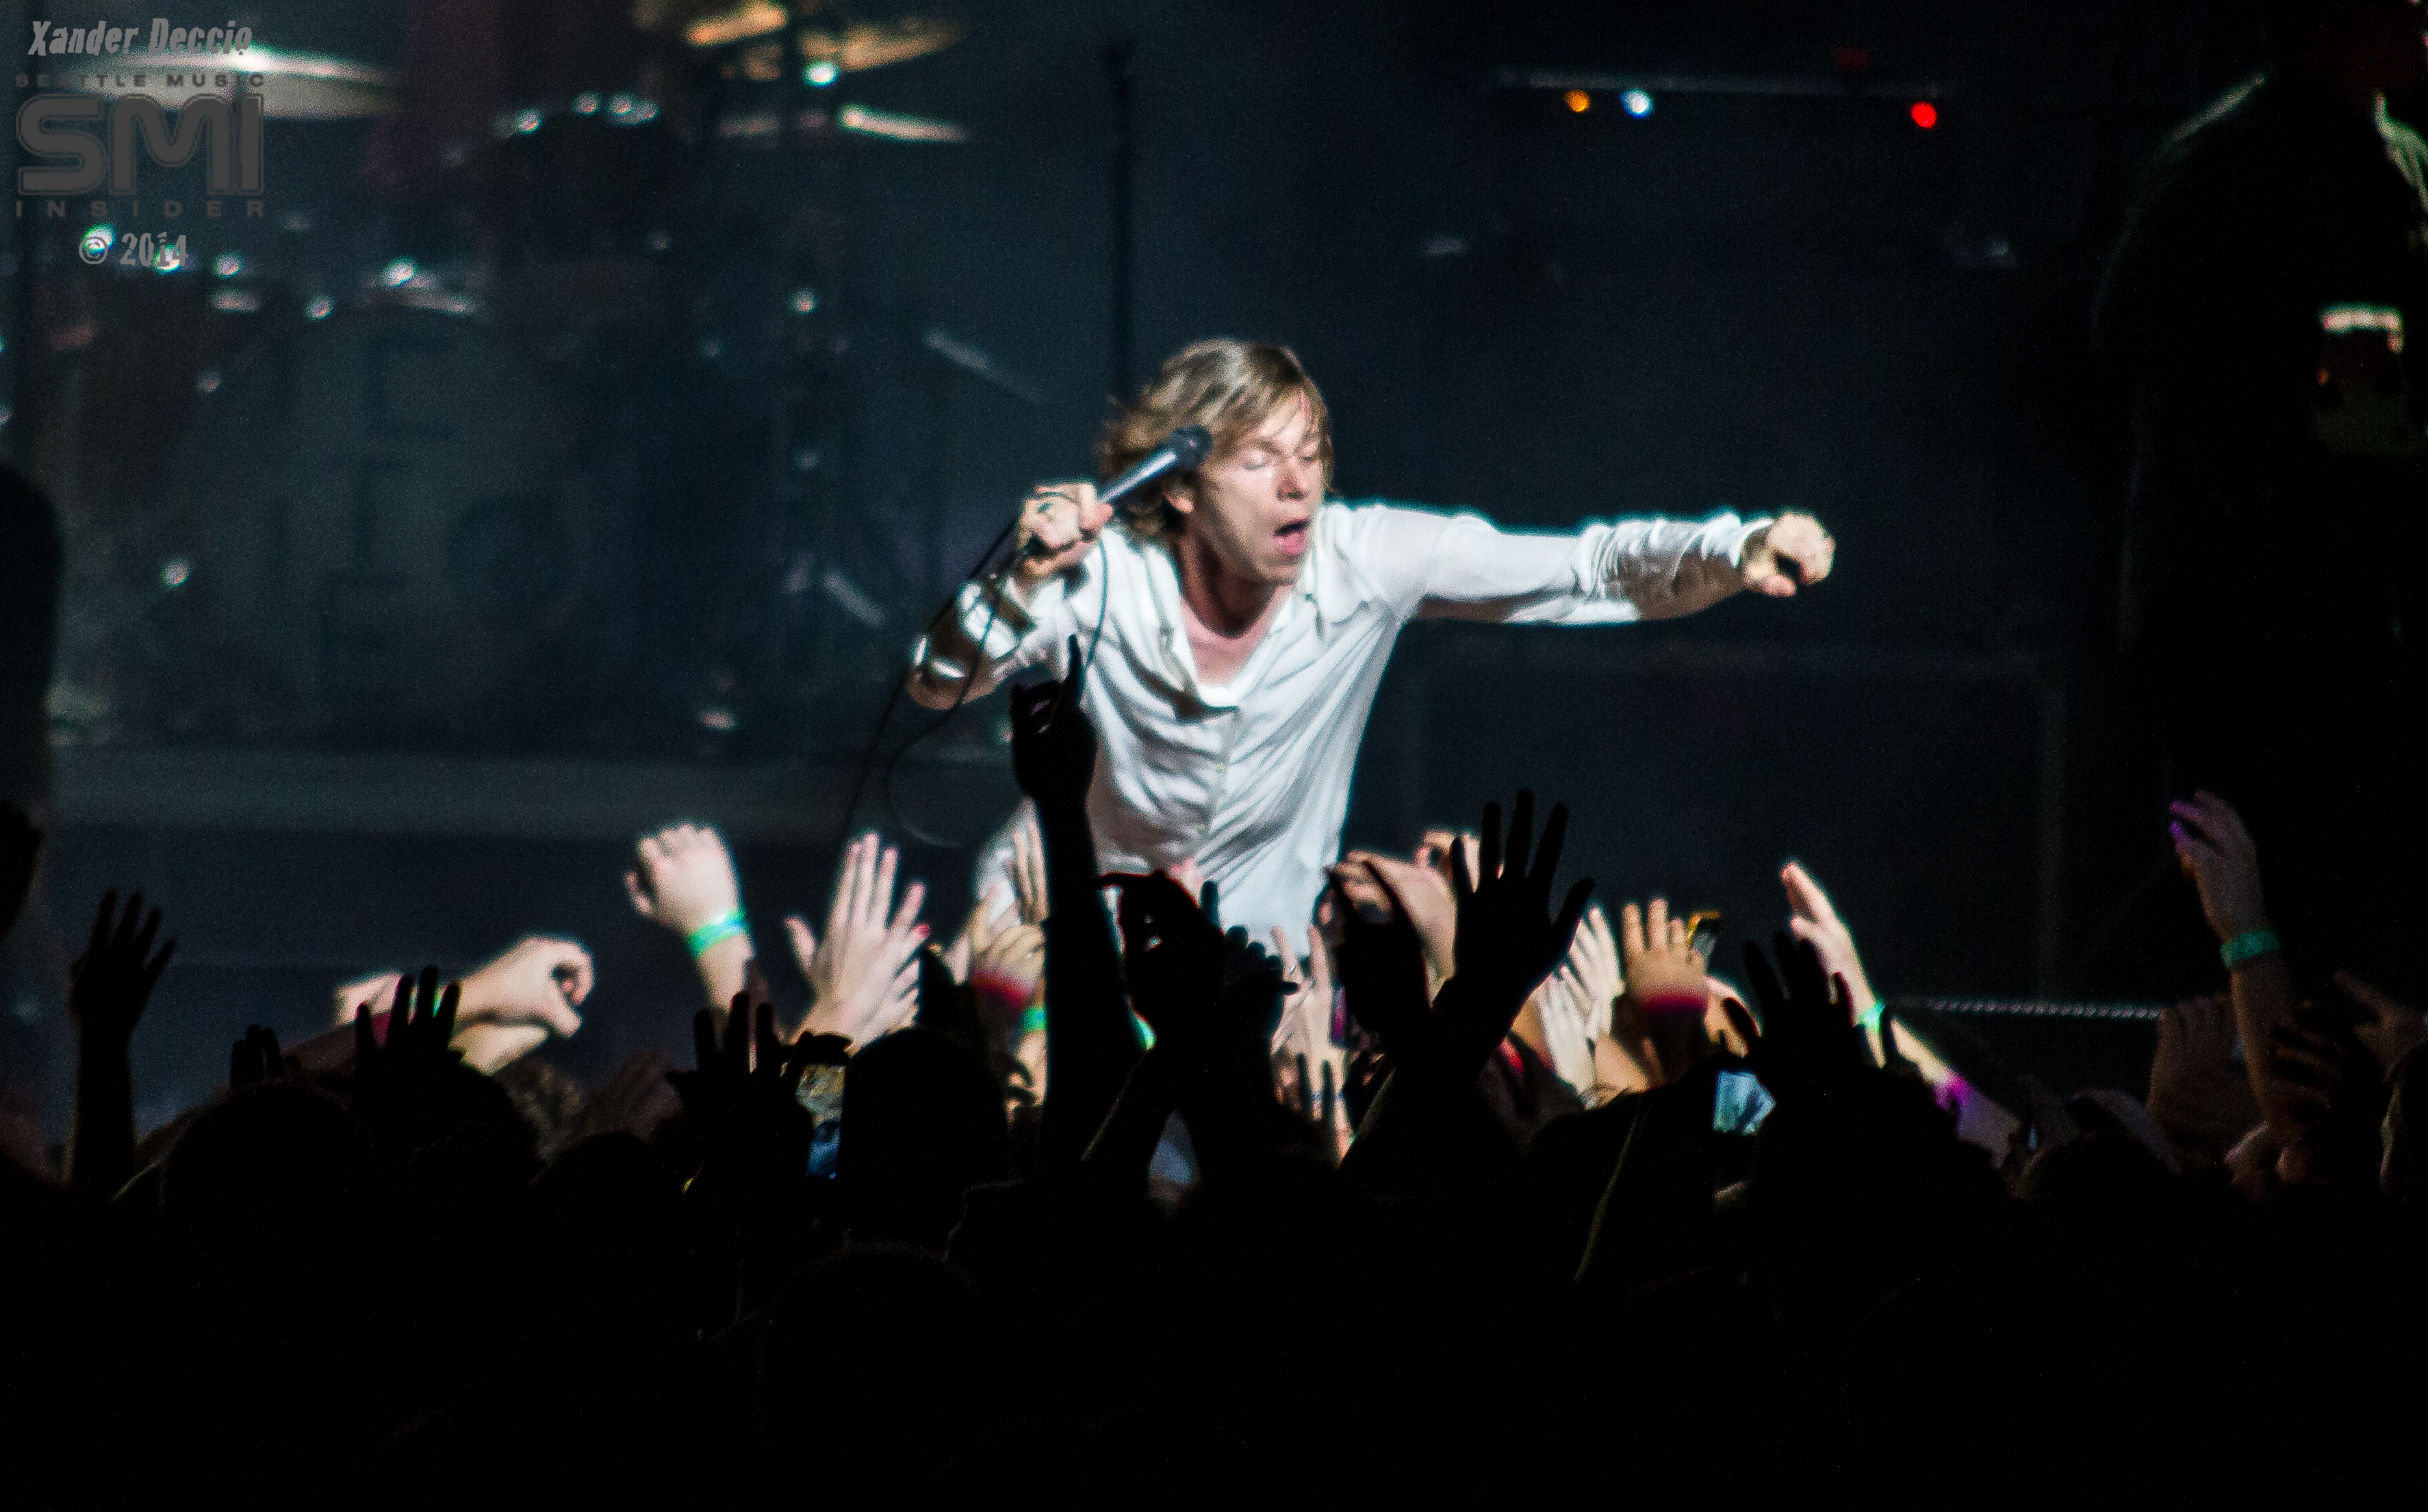 Cage The Elephant @ Deck The Hall Ball 2014 – Photo By Xander Deccio